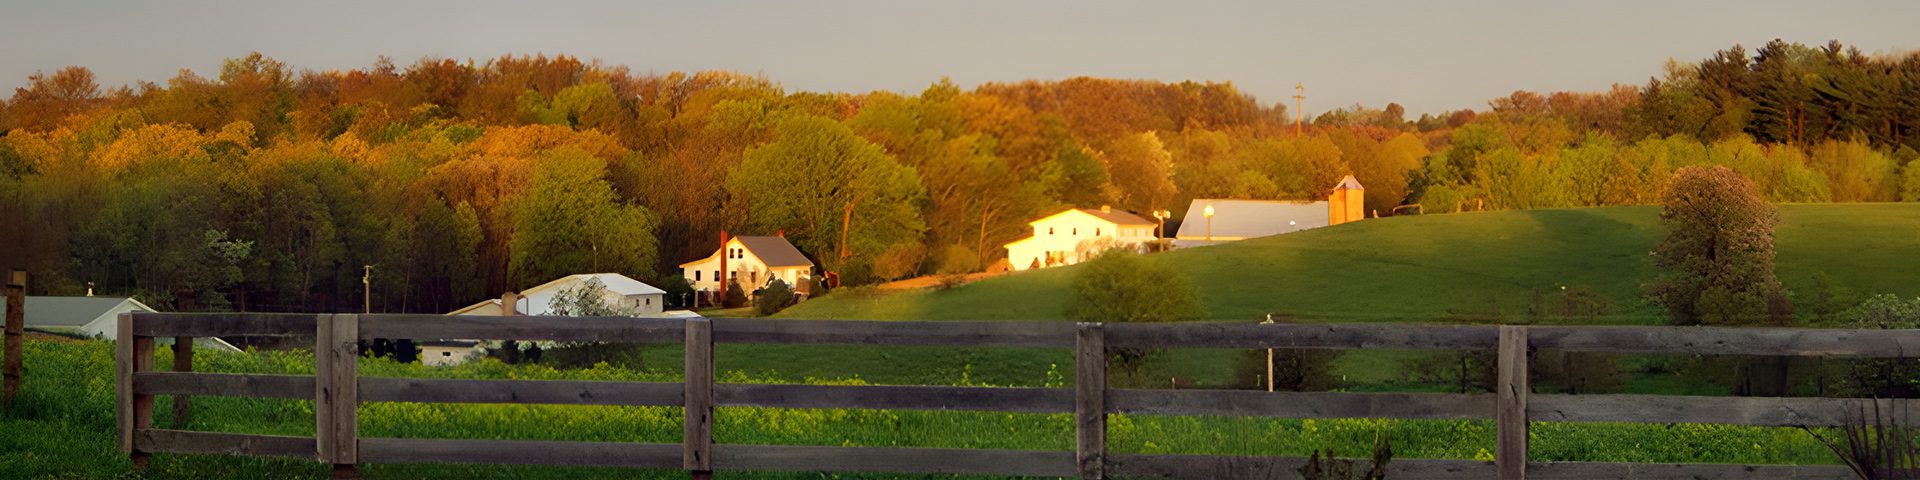 A view of some houses in the distance from behind a fence.